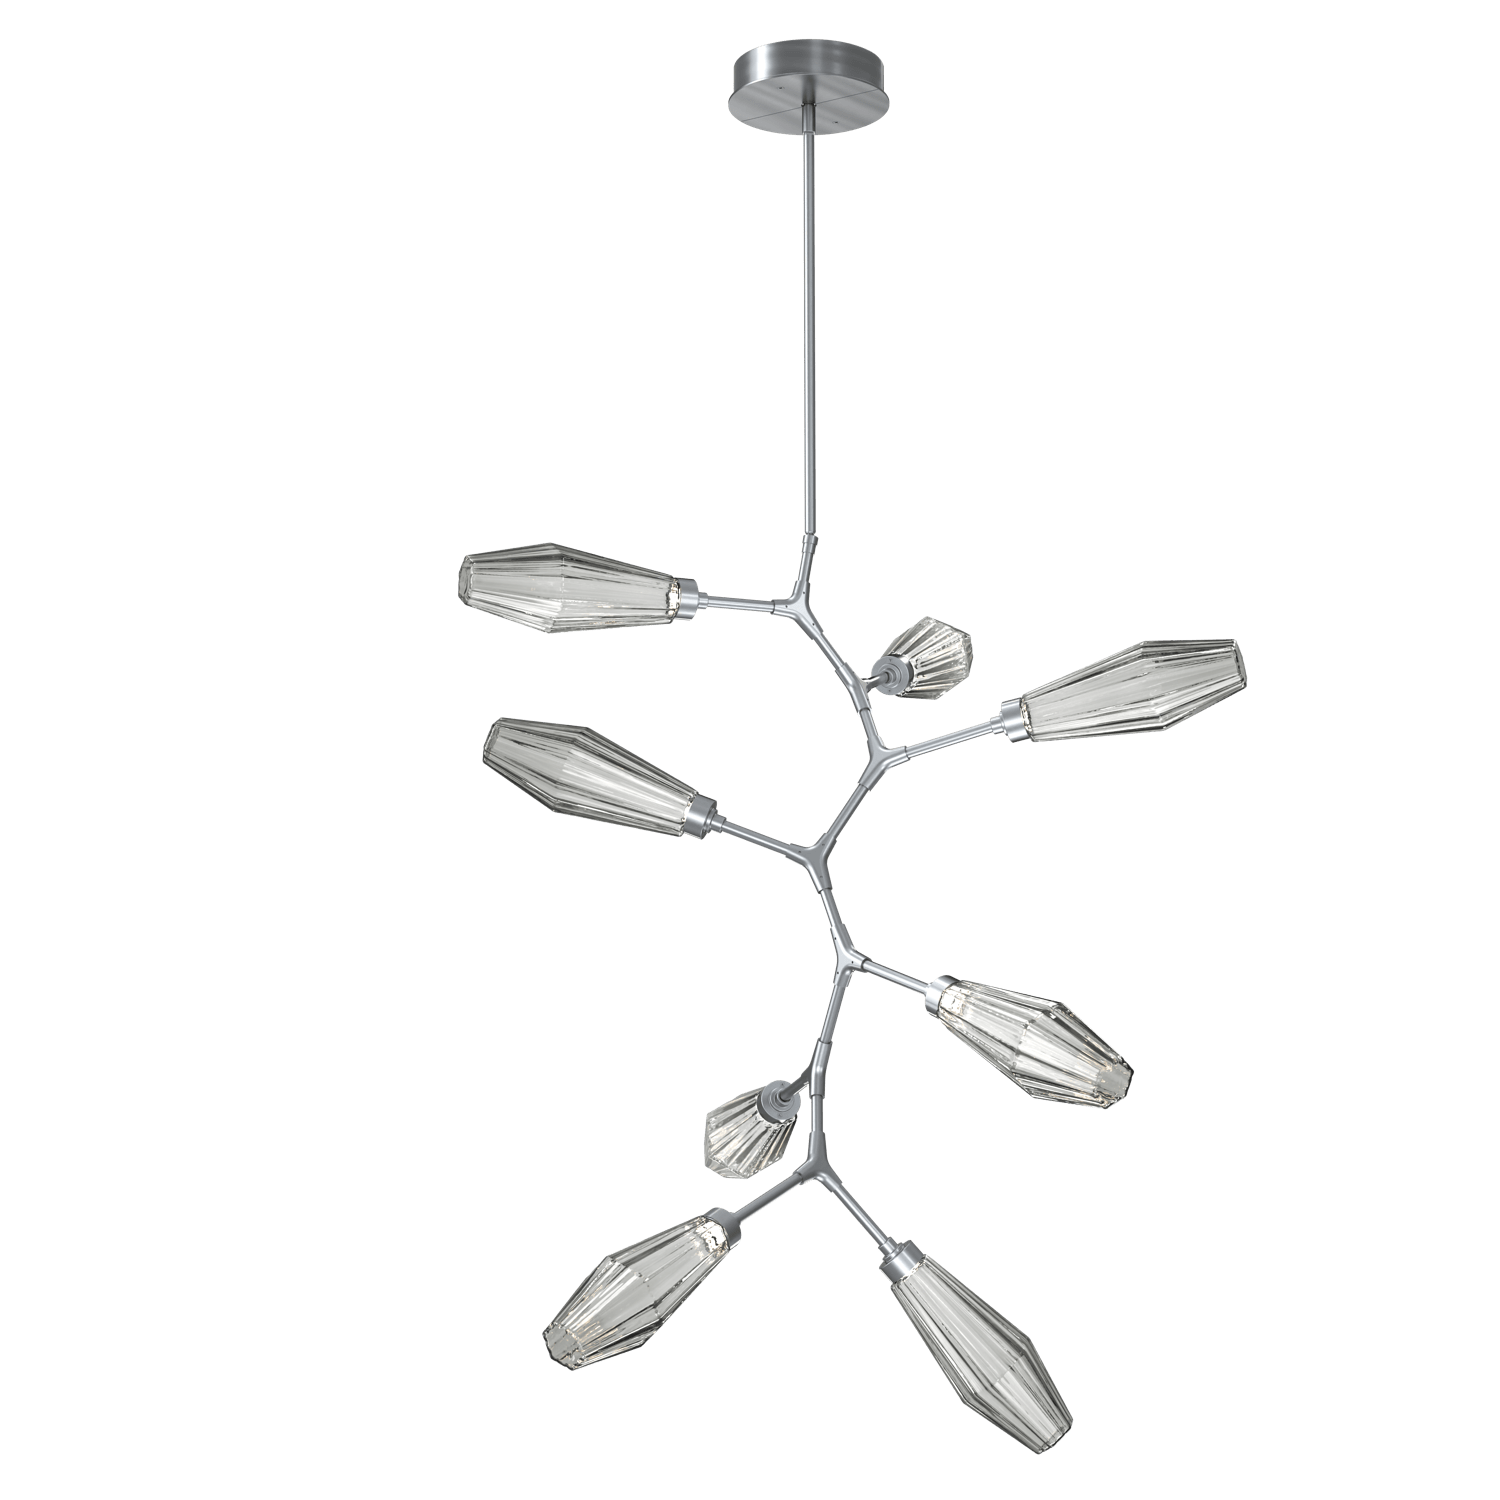 CHB0049-VB-GM-RS-Hammerton-Studio-Aalto-8-light-modern-vine-chandelier-with-gunmetal-finish-and-optic-ribbed-smoke-glass-shades-and-LED-lamping